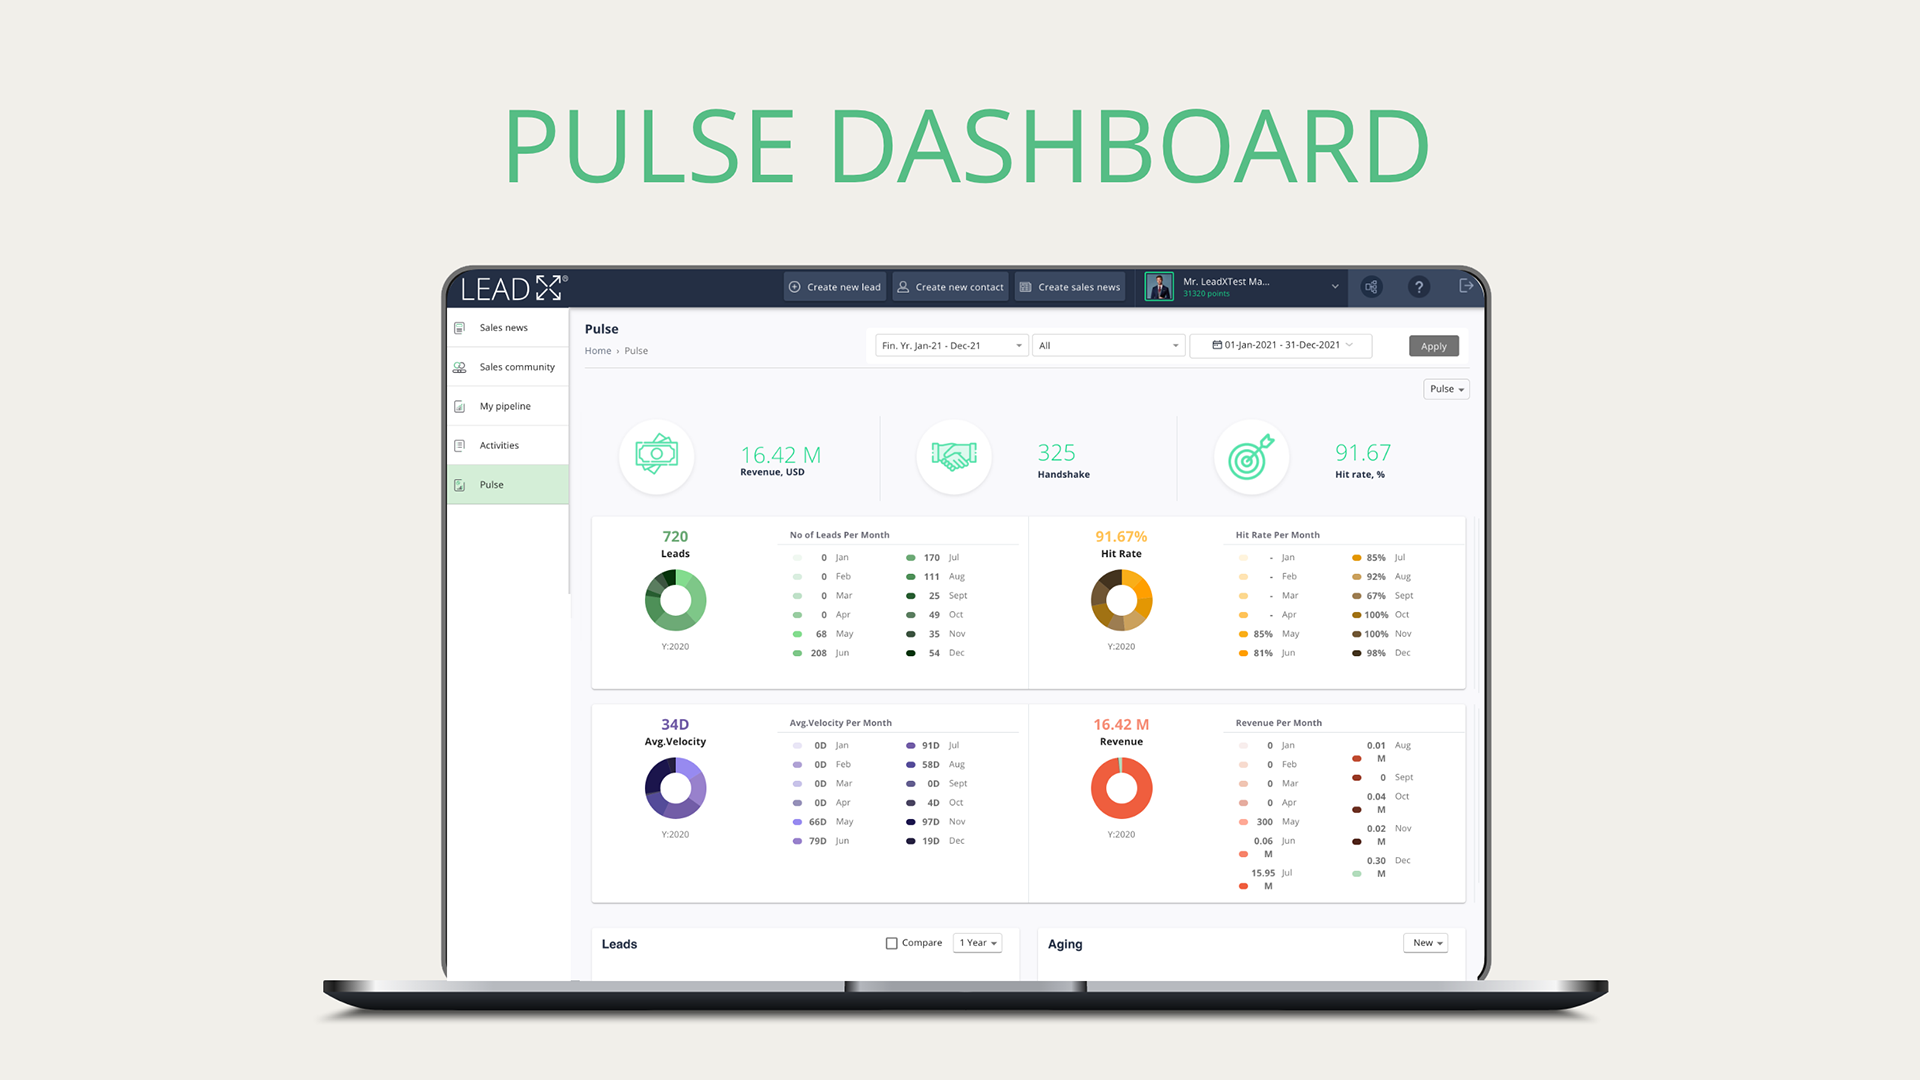 Get the pulse of your organization with simple dashboards